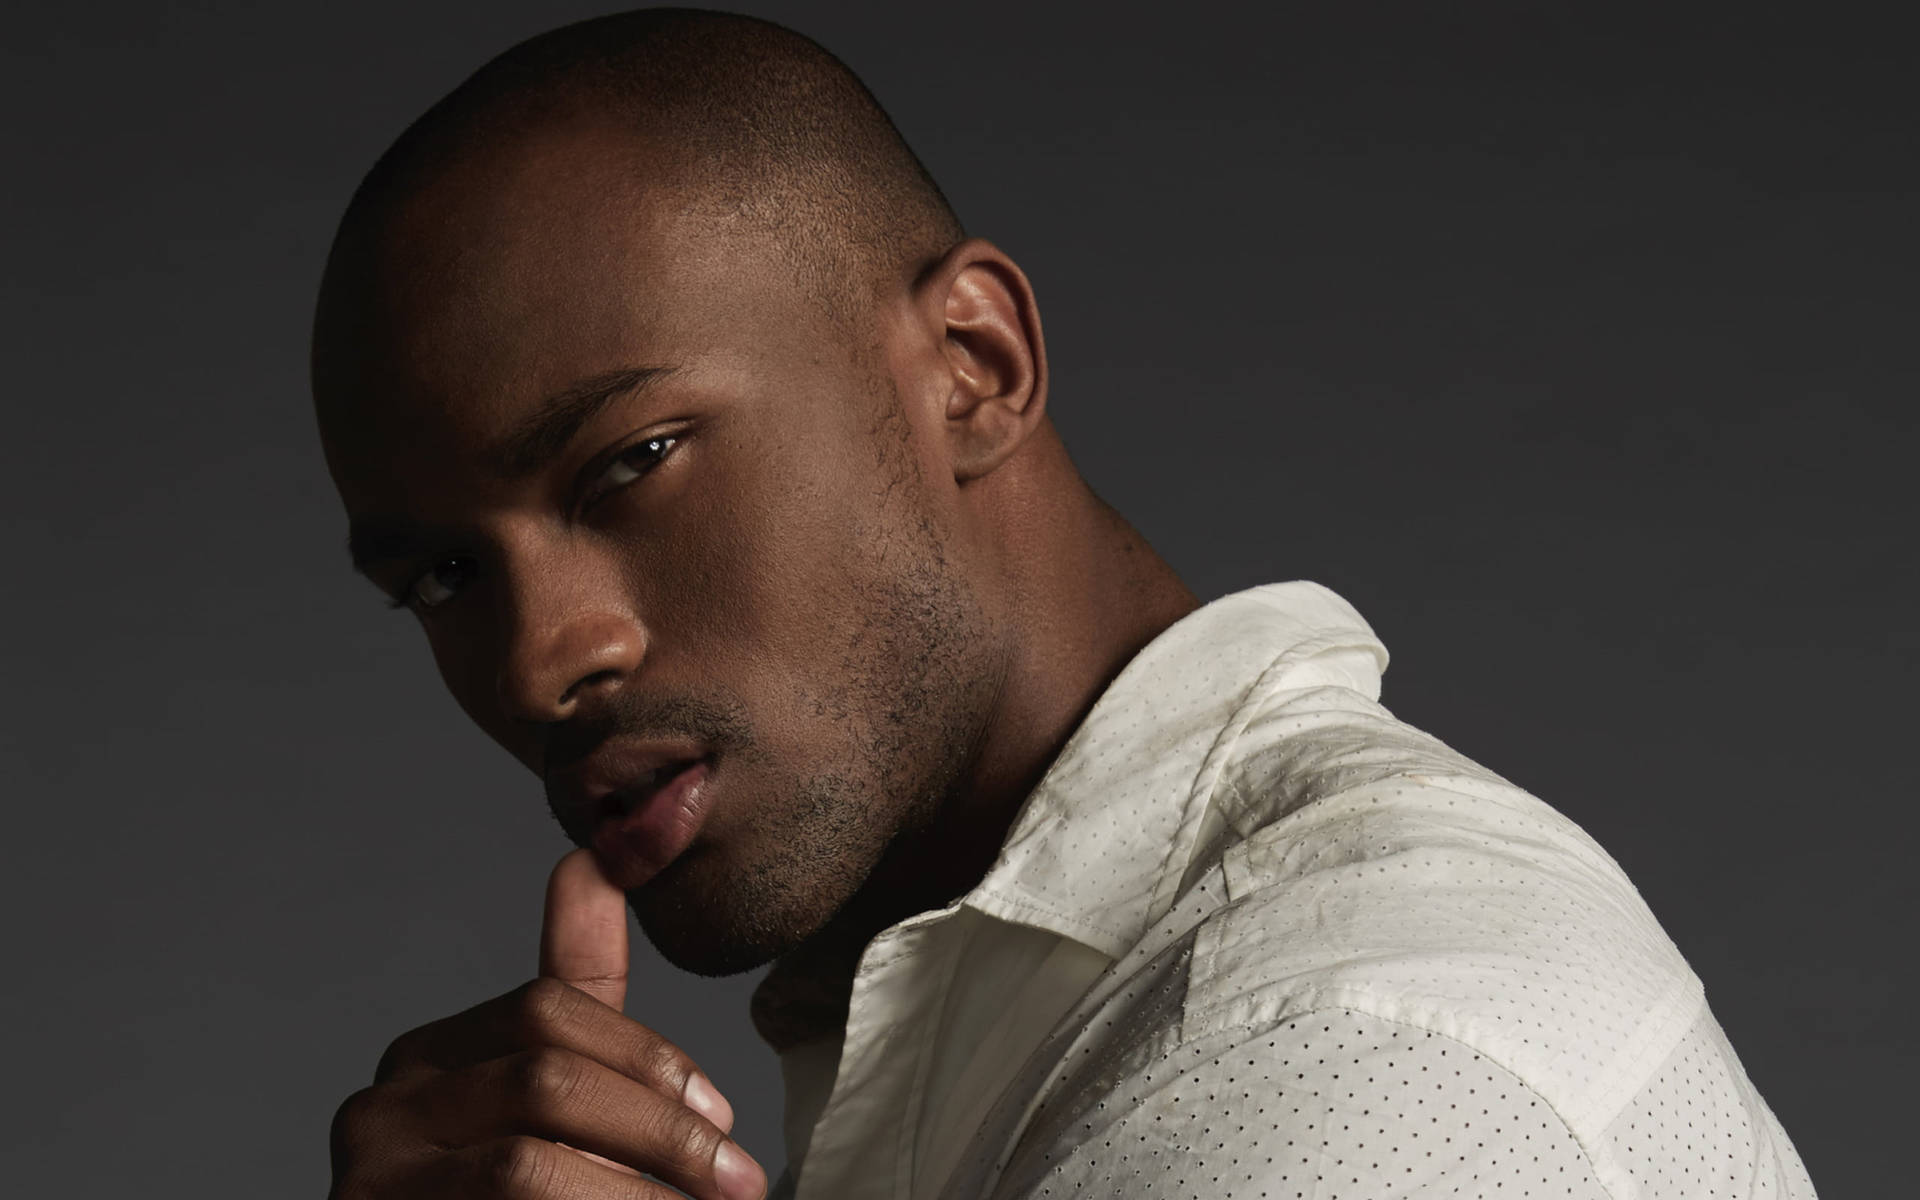 Keith Carlos Nfl Players Background